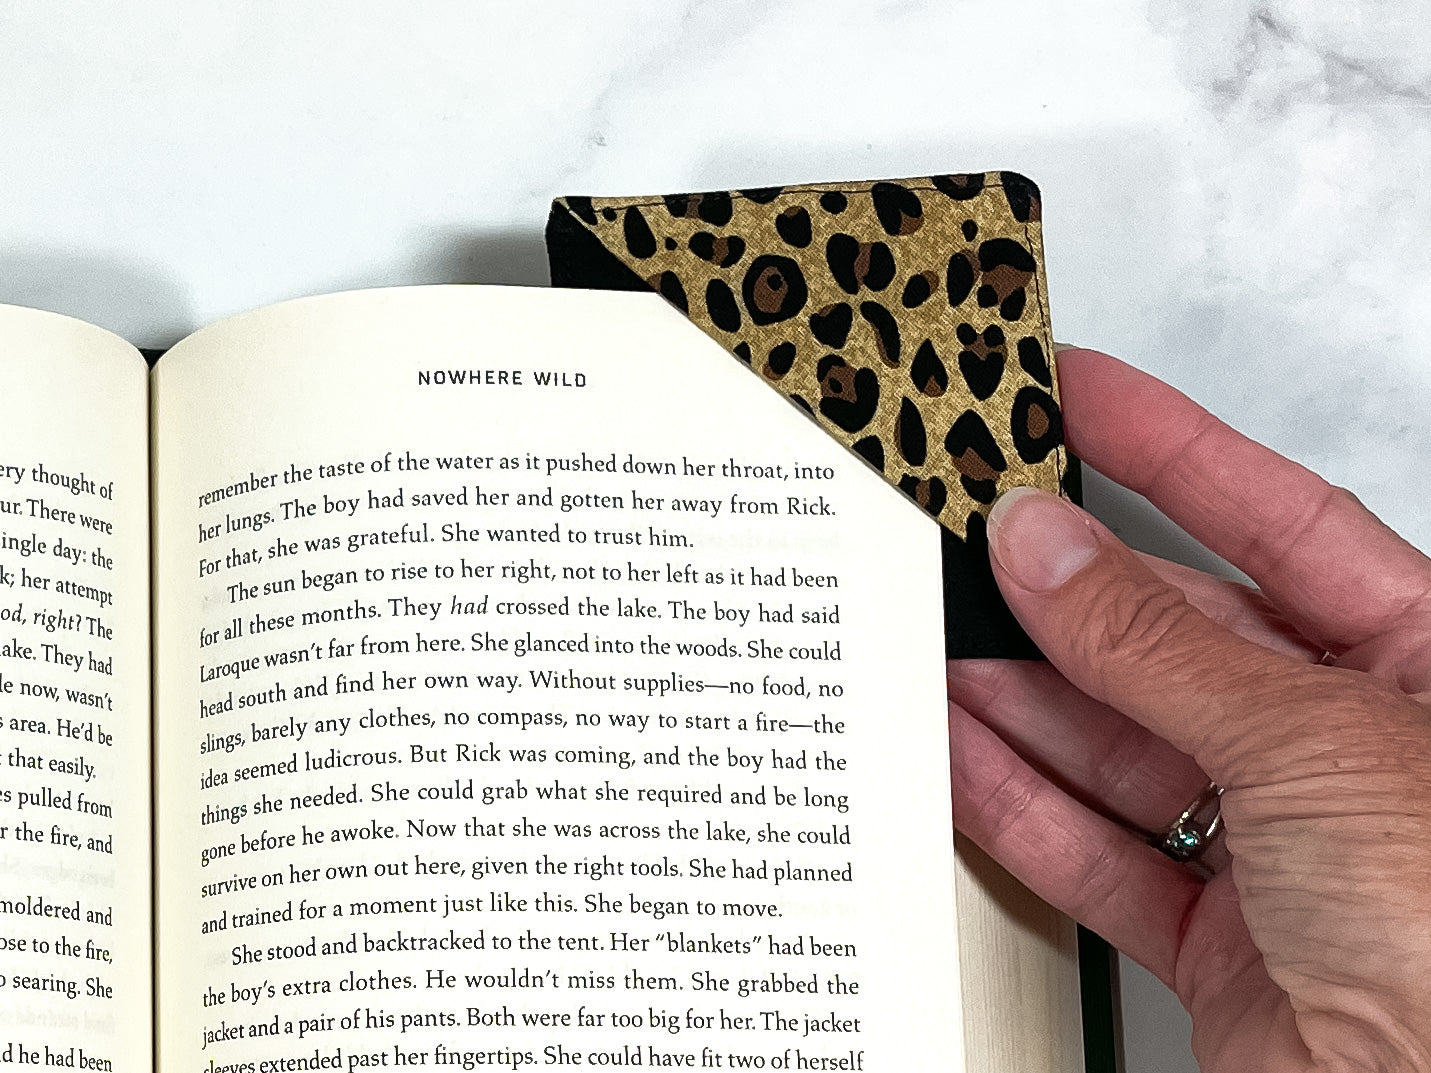 A handmade corner bookmark made from a fun leopard print themed cotton fabric in shades of brown, gold and black.  The page marker is square and is being shown sliding over the corner of a page in a book.